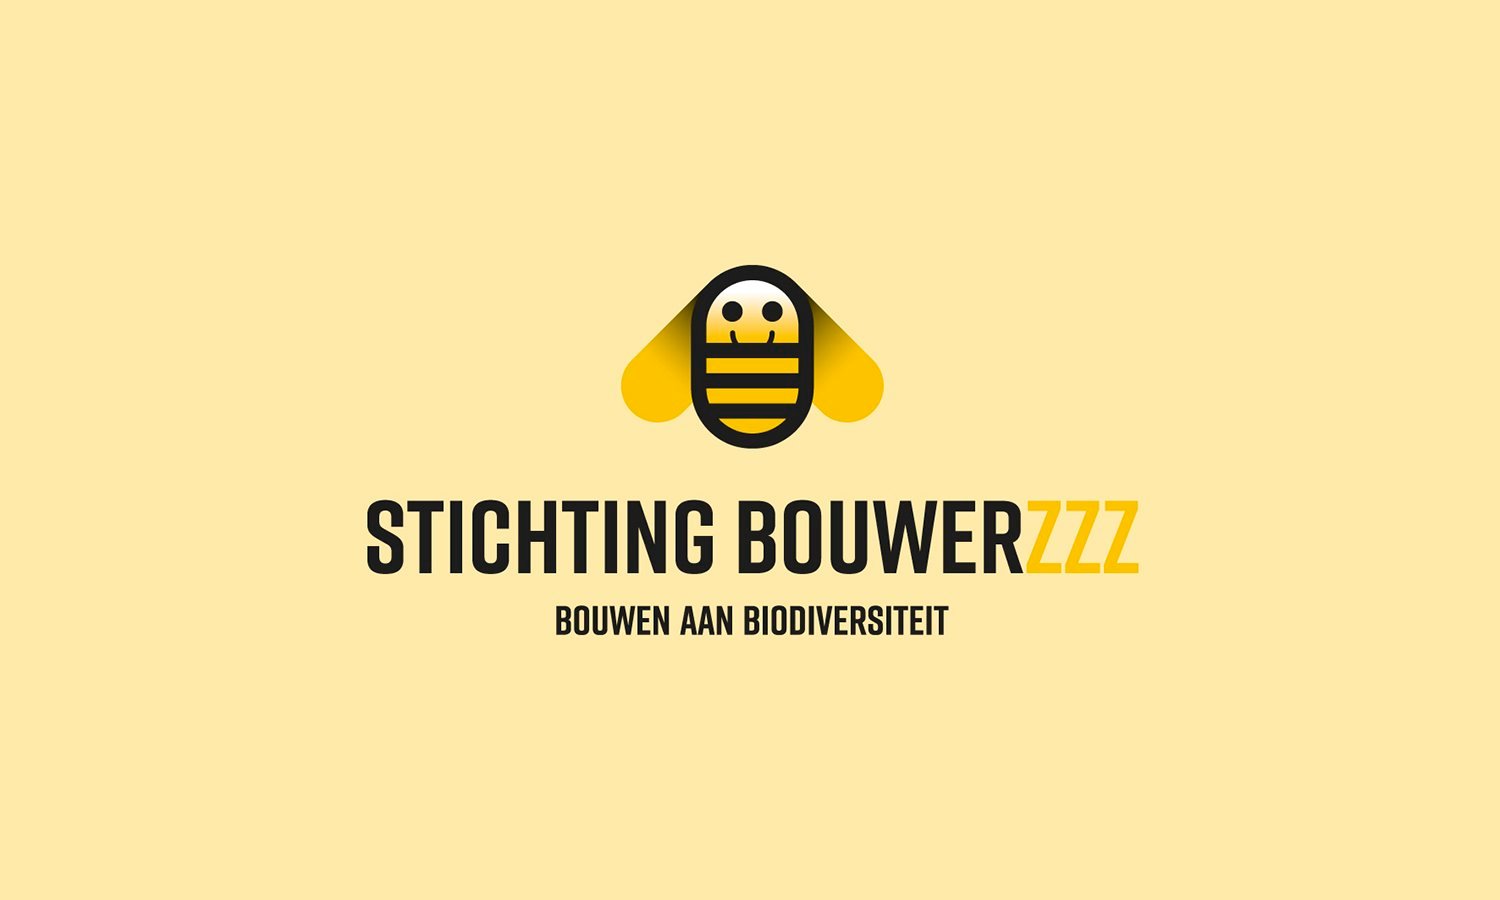 Stichting Bouwre: Complete Review and Details